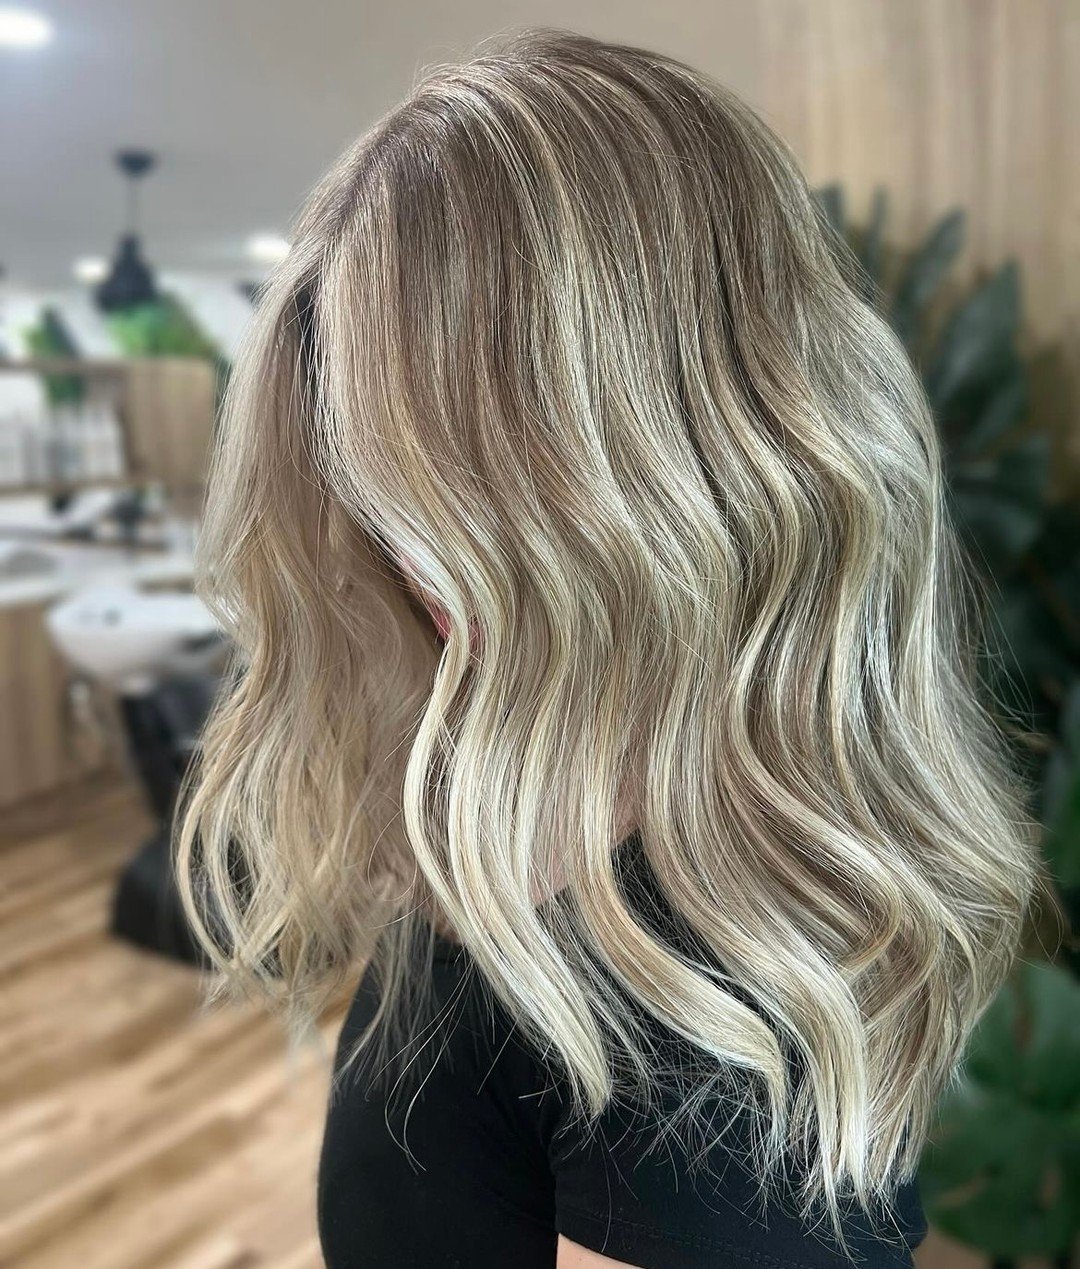 A moment for this blondie 👏
@thathairthough_

 #ctextensions #ctblonde #ctsalon #ctbalayage #glastonburyhair #glastonburyextensions #glastonburycolorist #glastonburyblonde #glastonburybalayage #thairextensions #glastonburyhairextensions #handtiedext